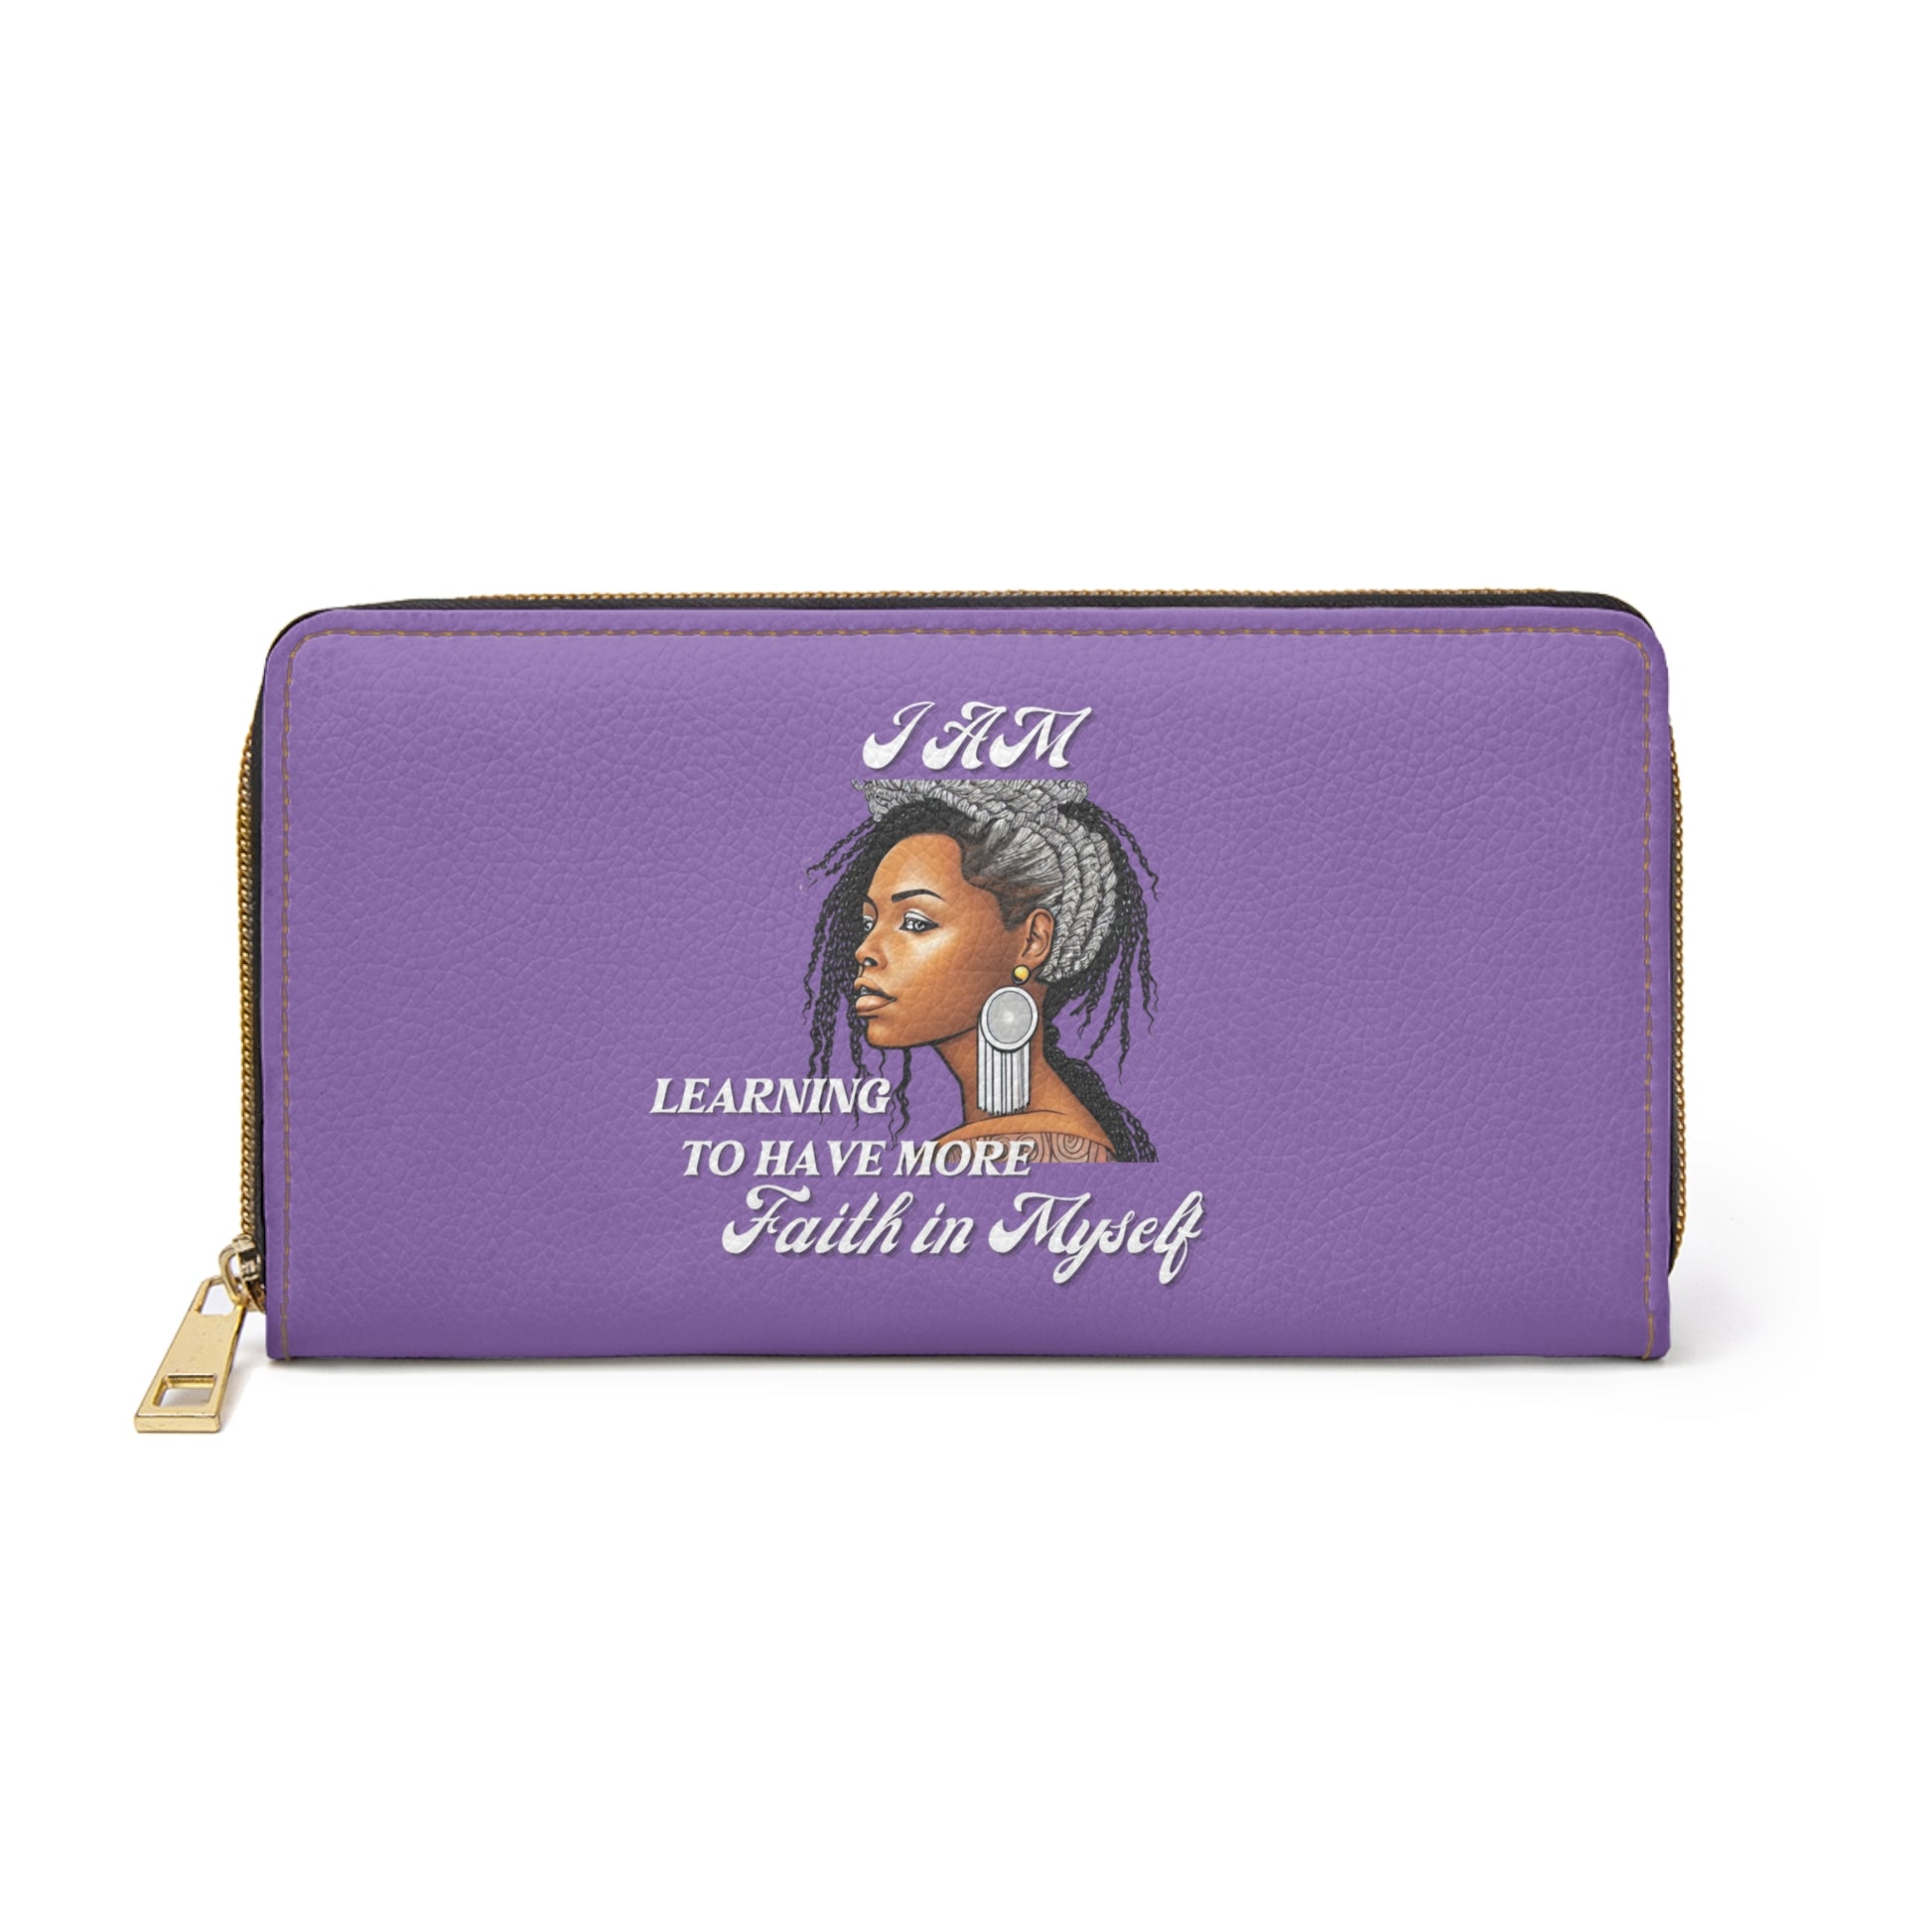 " Faith In Myself" -Positive Afrocentric Affirmation Vegan Leather Wallet Bag- Empower Your Style and Self-Love; Purple Wallet